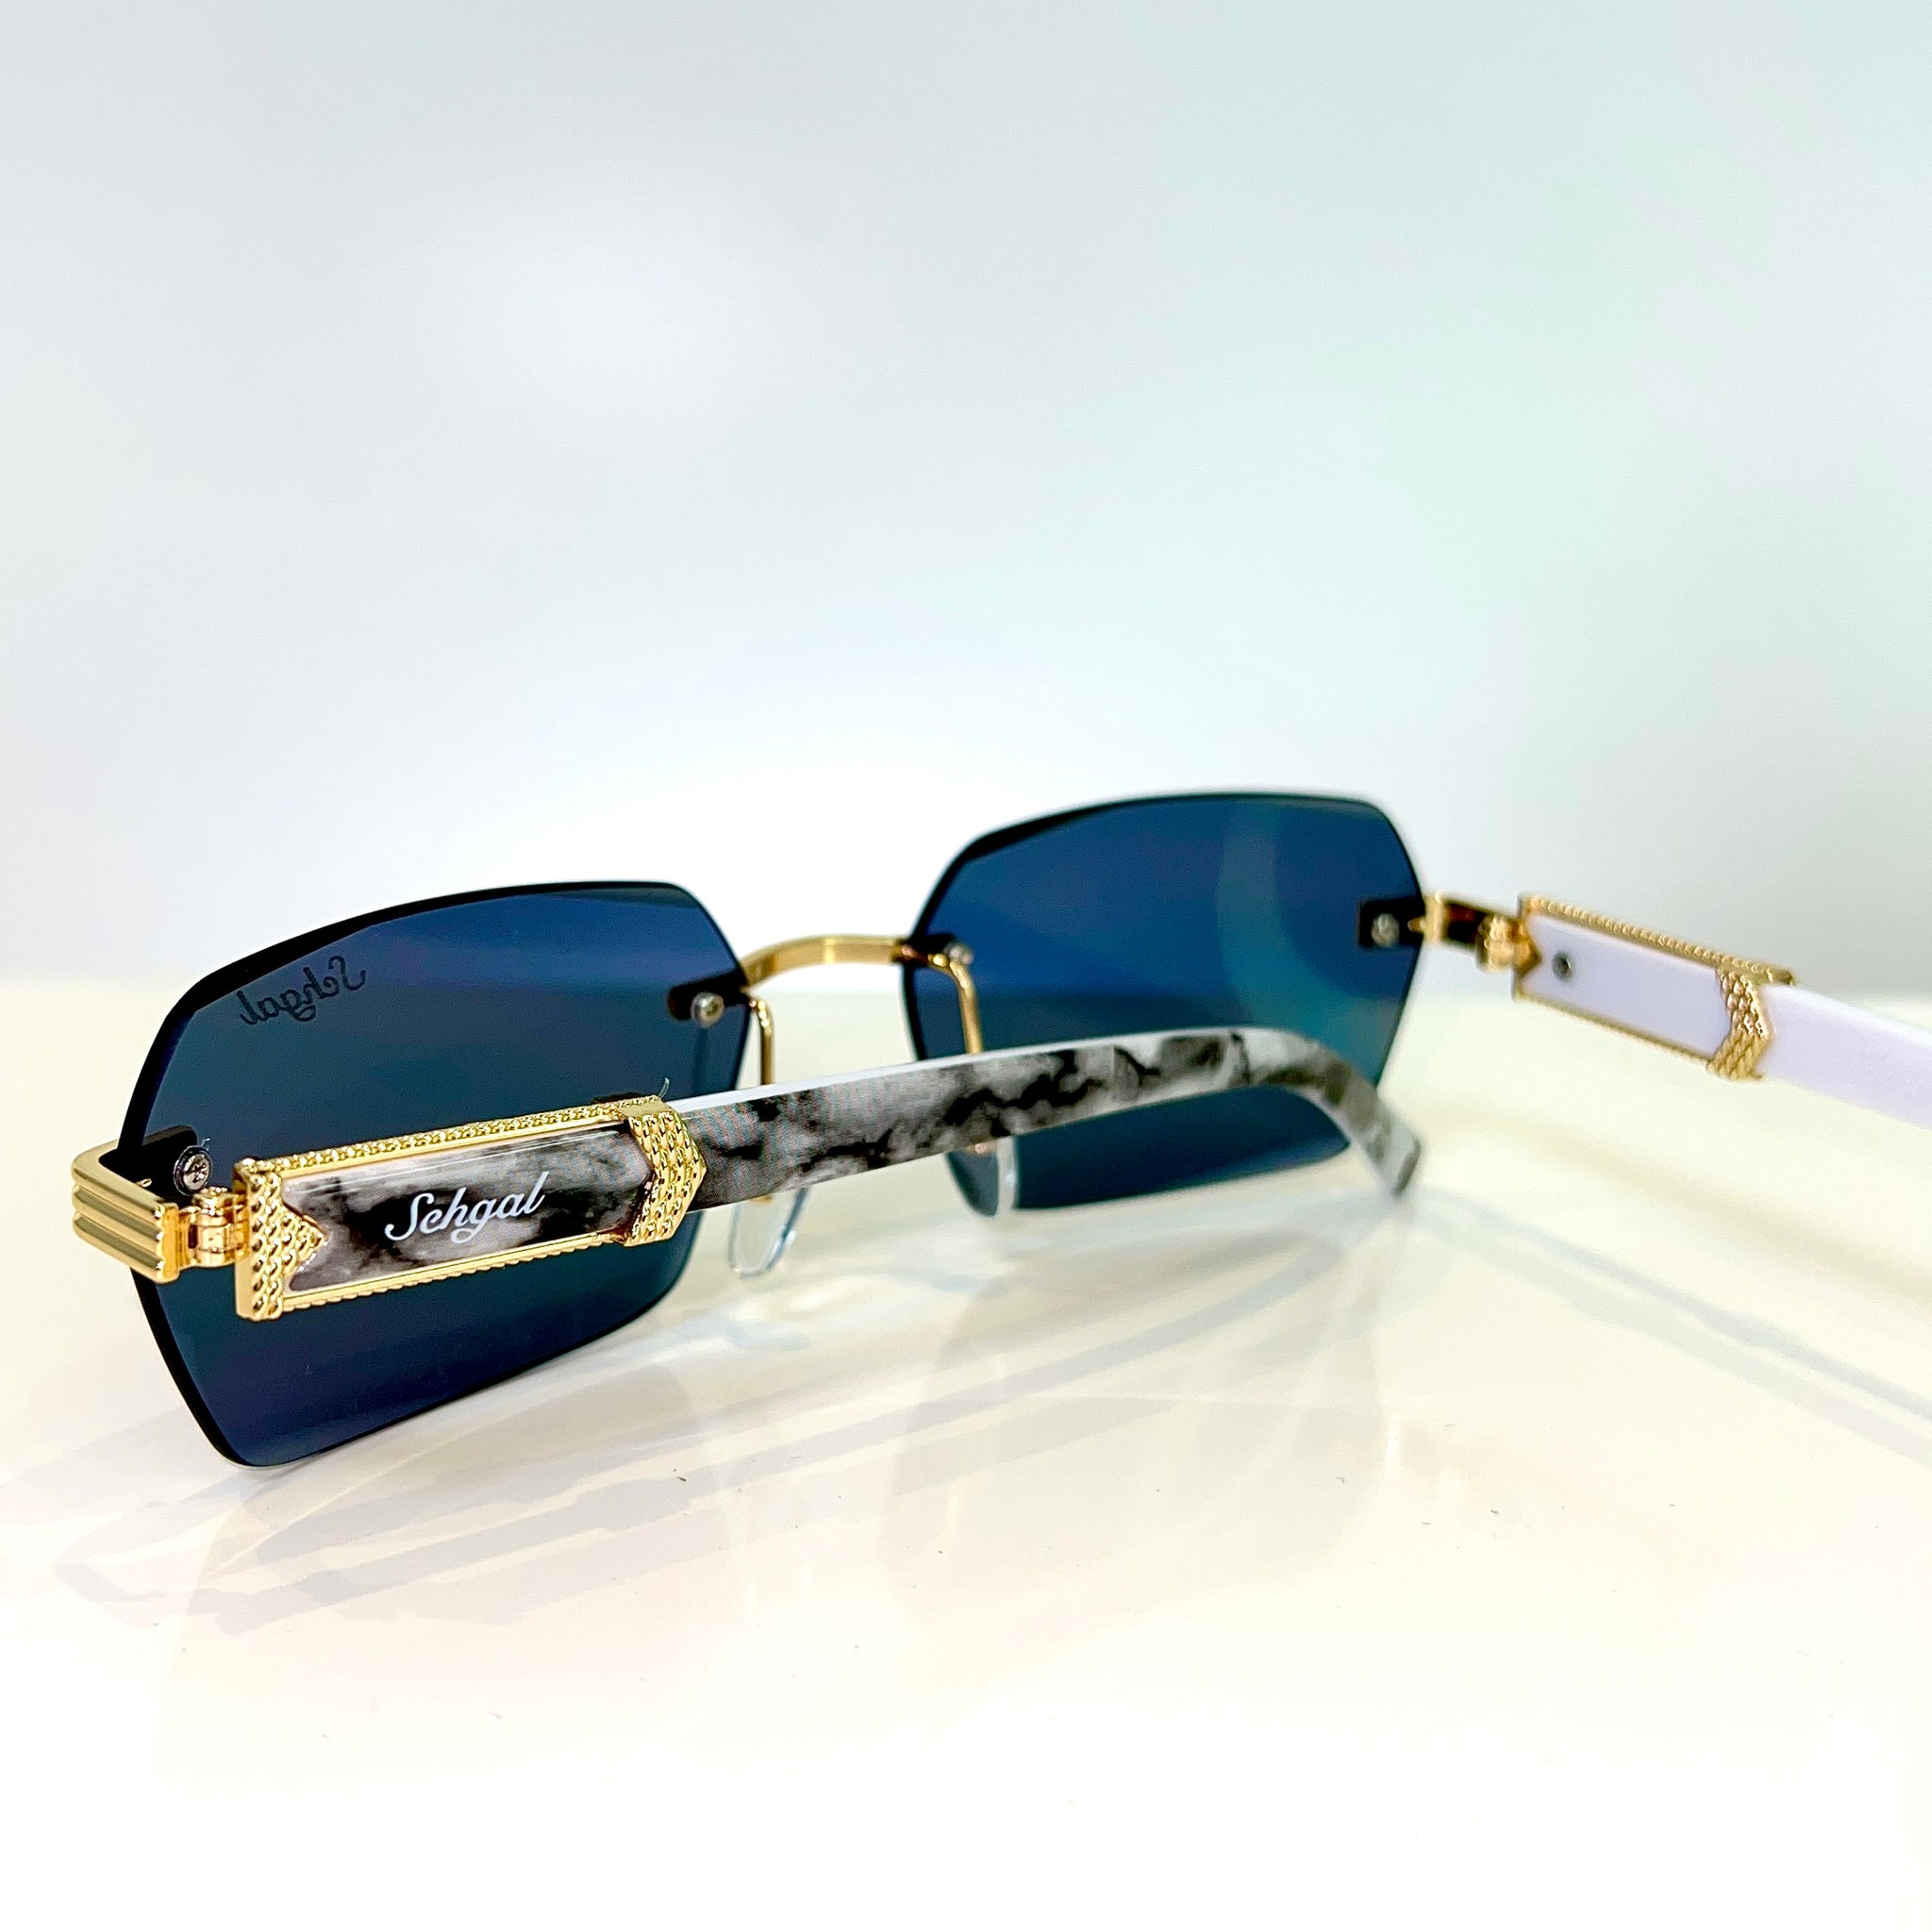 Marblecut Glasses - 14 carat gold plated - Black shade